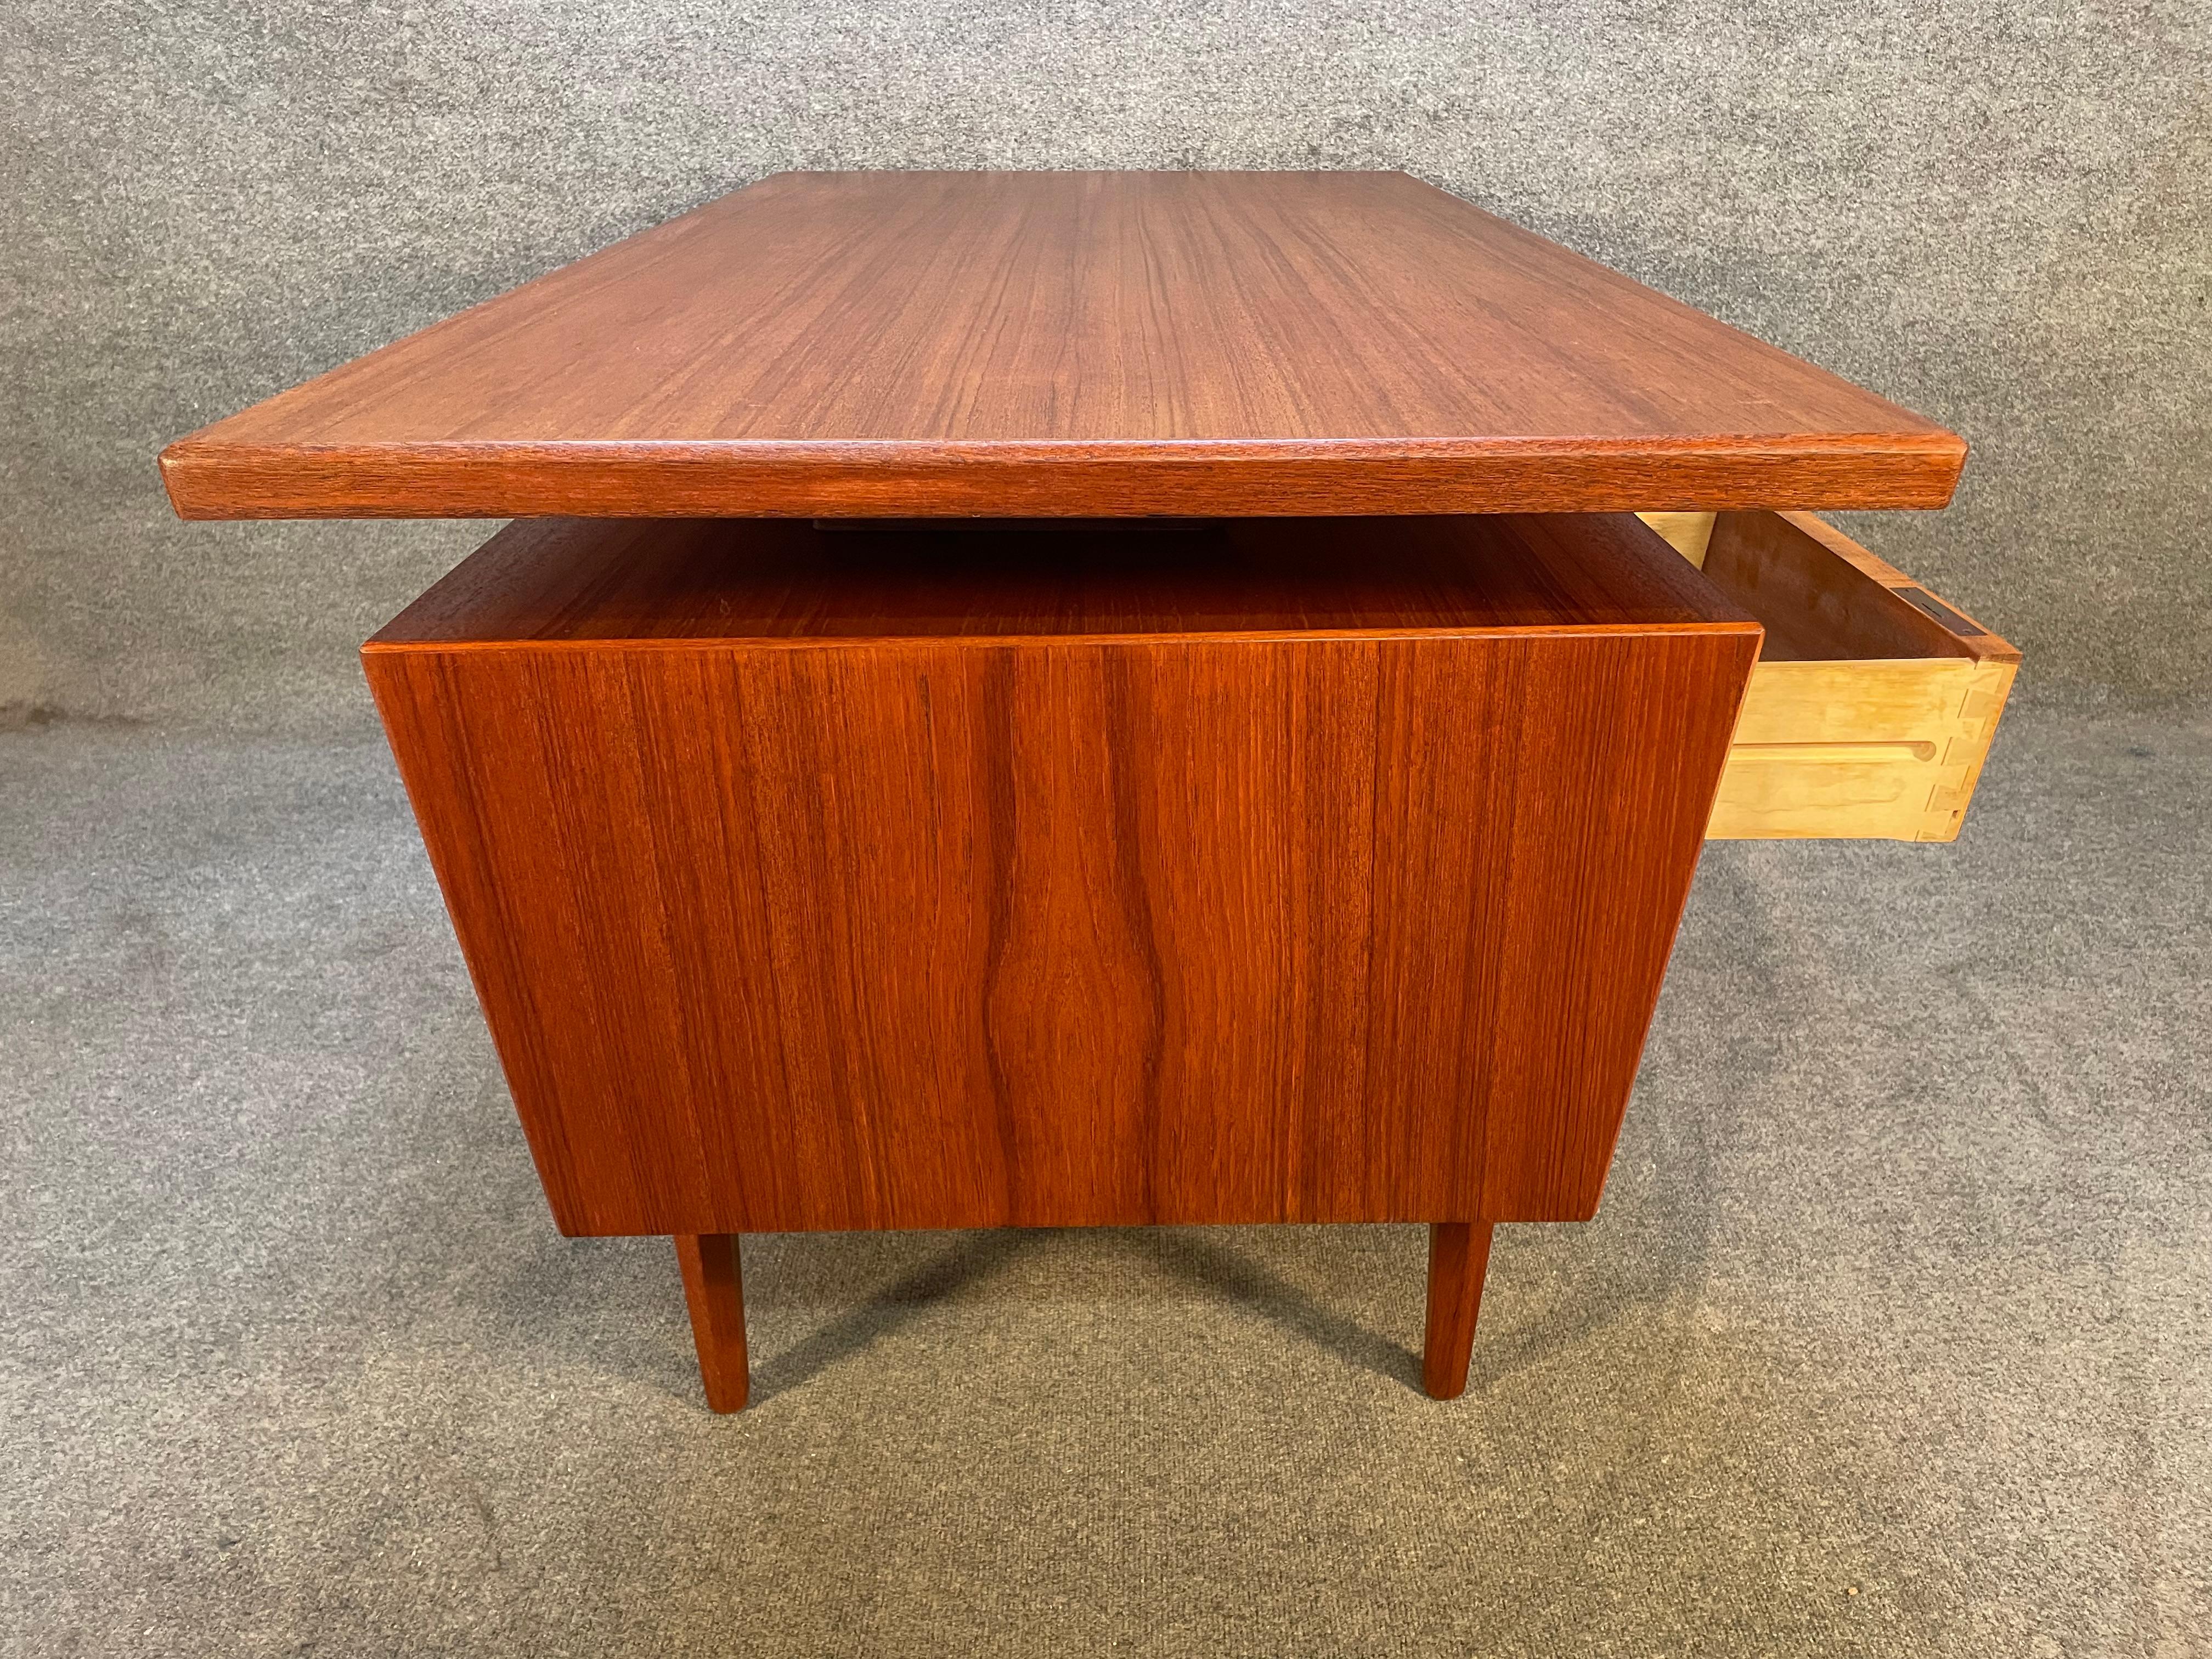 Here is a rare and beautiful Scandinavian Modern desk in teak wood manufactured by Clausen and Søn isn Denmark in the 1960s.
This special piece, recently imported from Europe to California before its refinishing, features a terrific angular design,